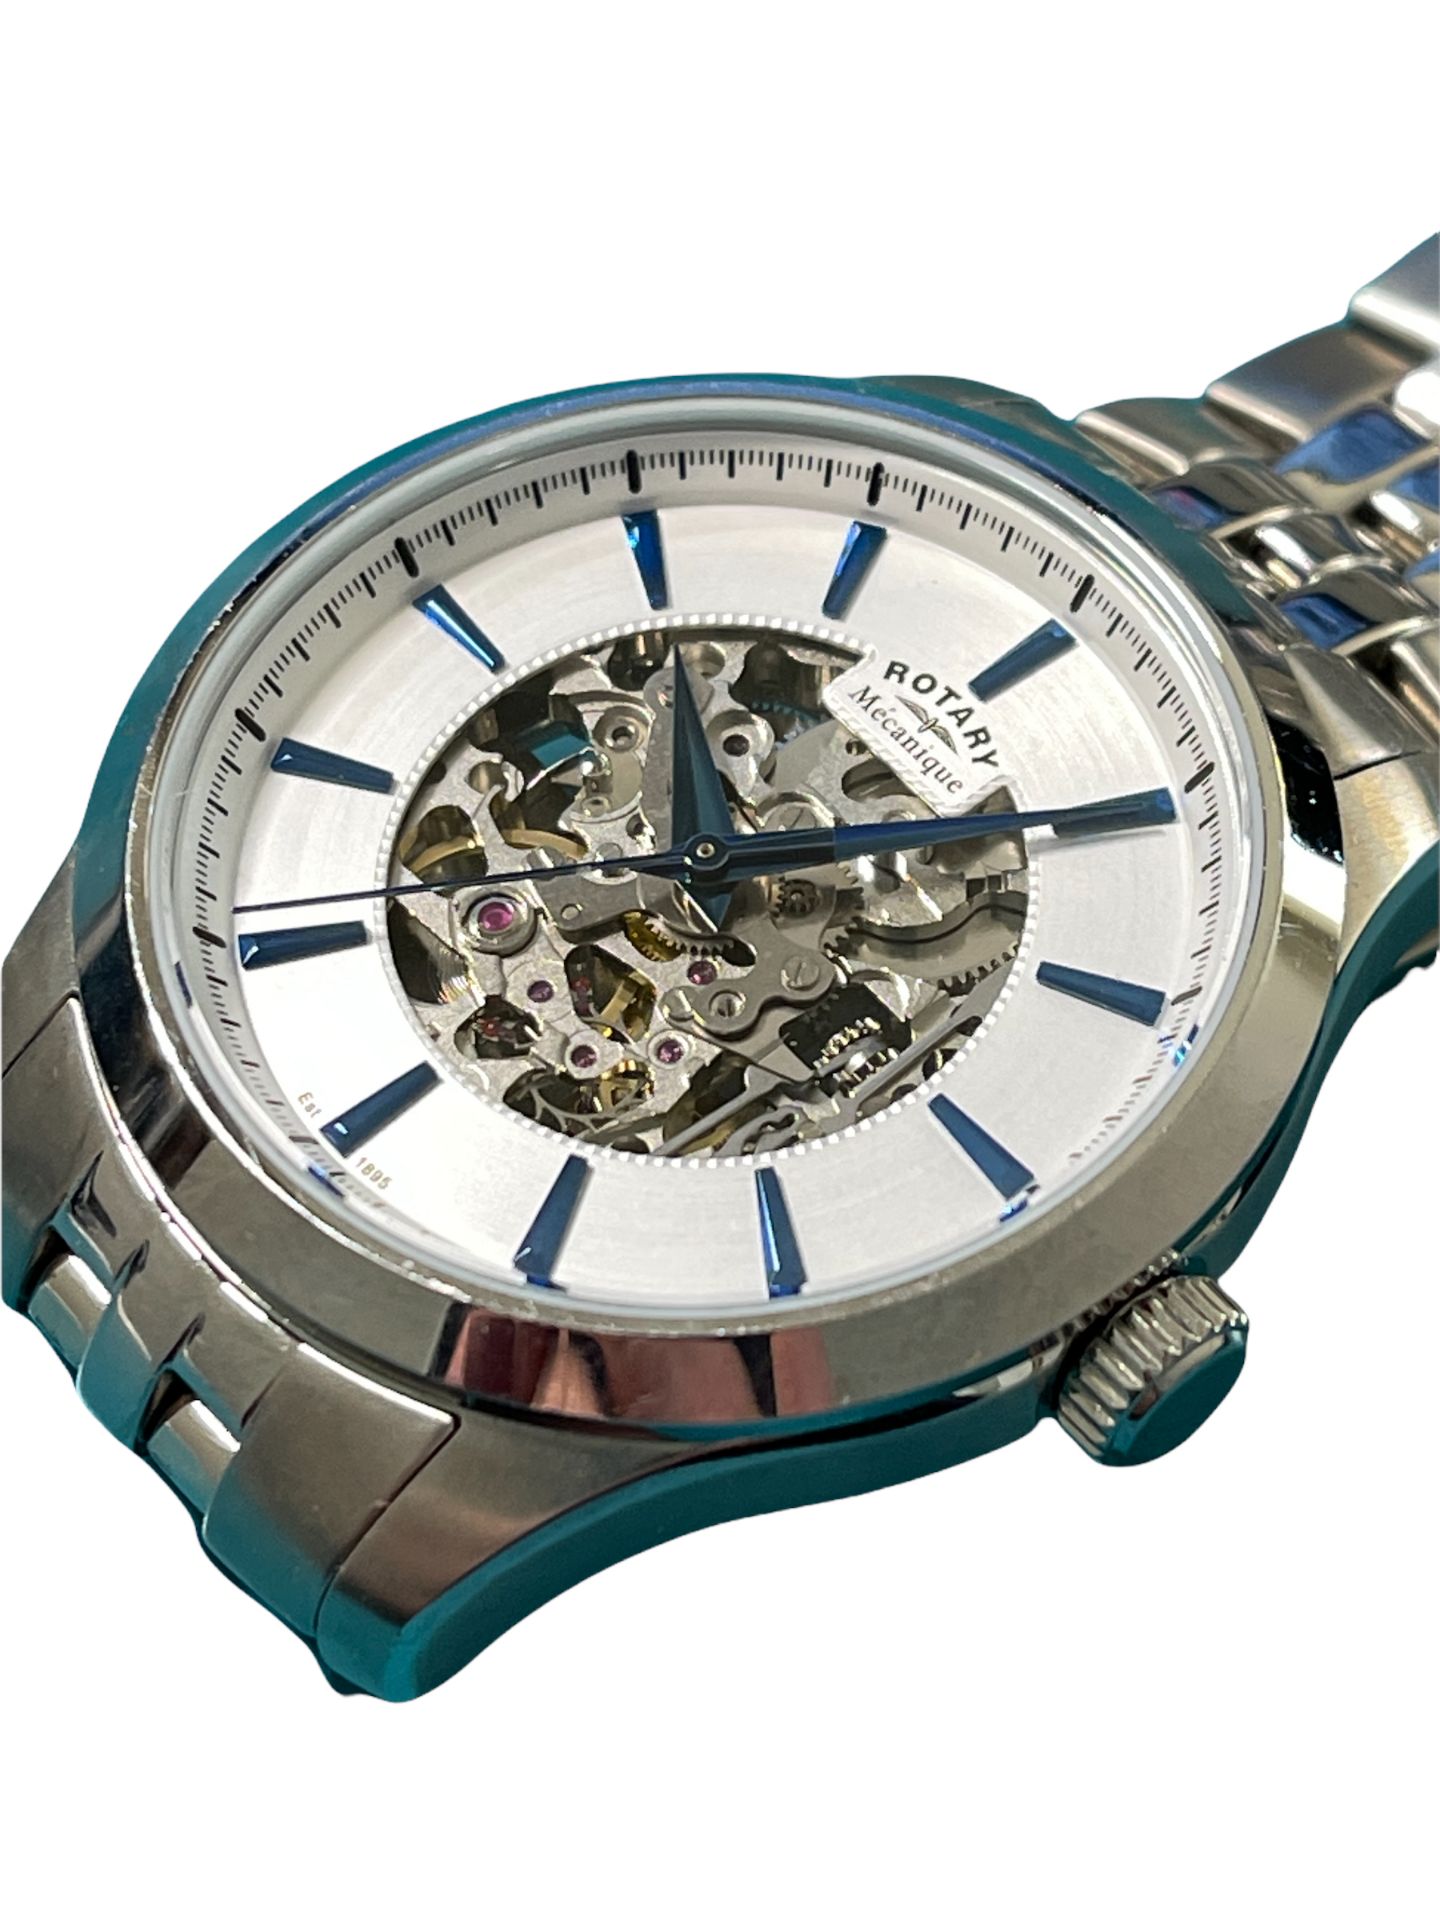 R29 Rotary automatic Skeleton Mans watch - Image 5 of 7